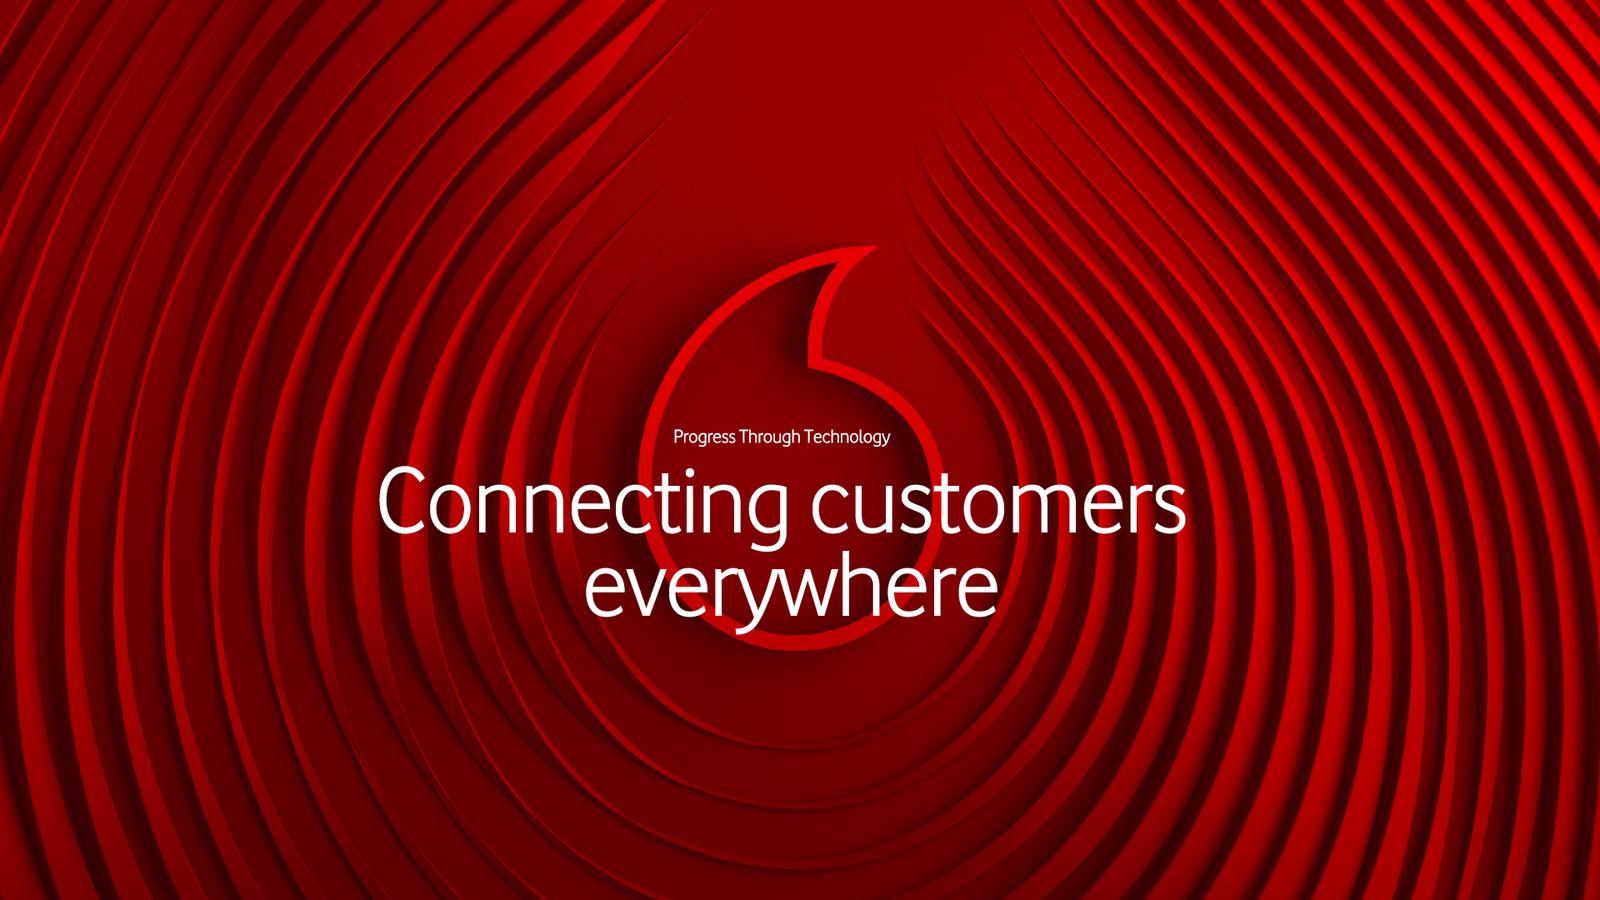 Progress through technology: Connecting customers everywhere